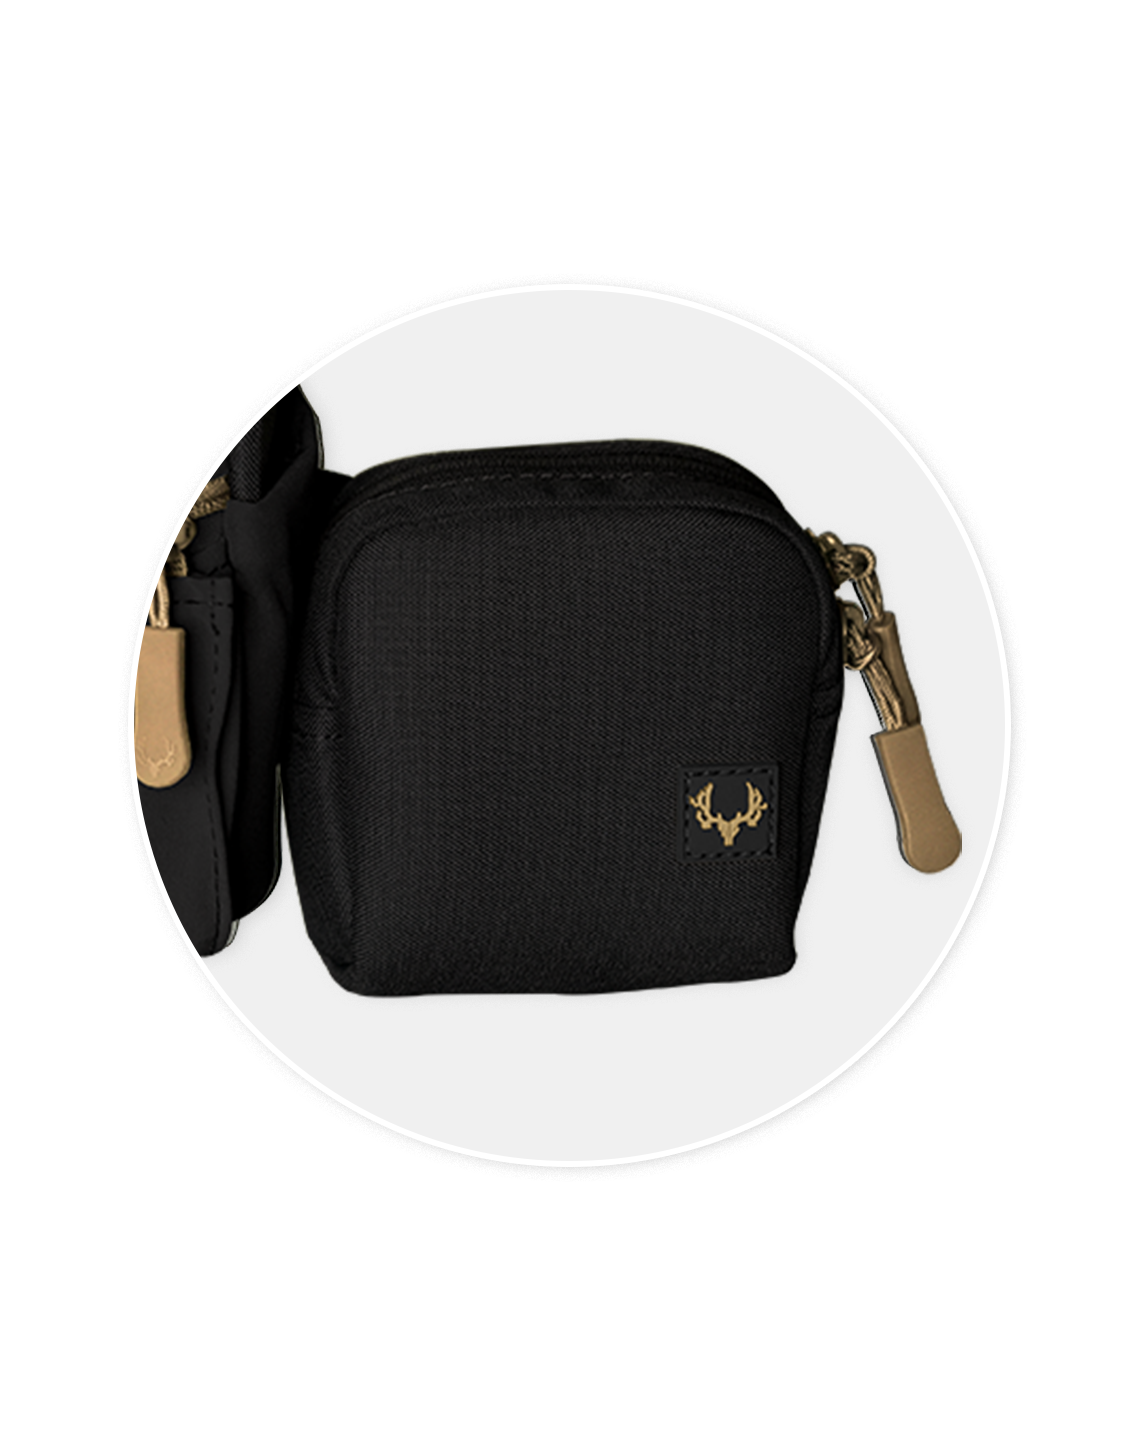 Black & tan accessory pouch for silent bullet storage.